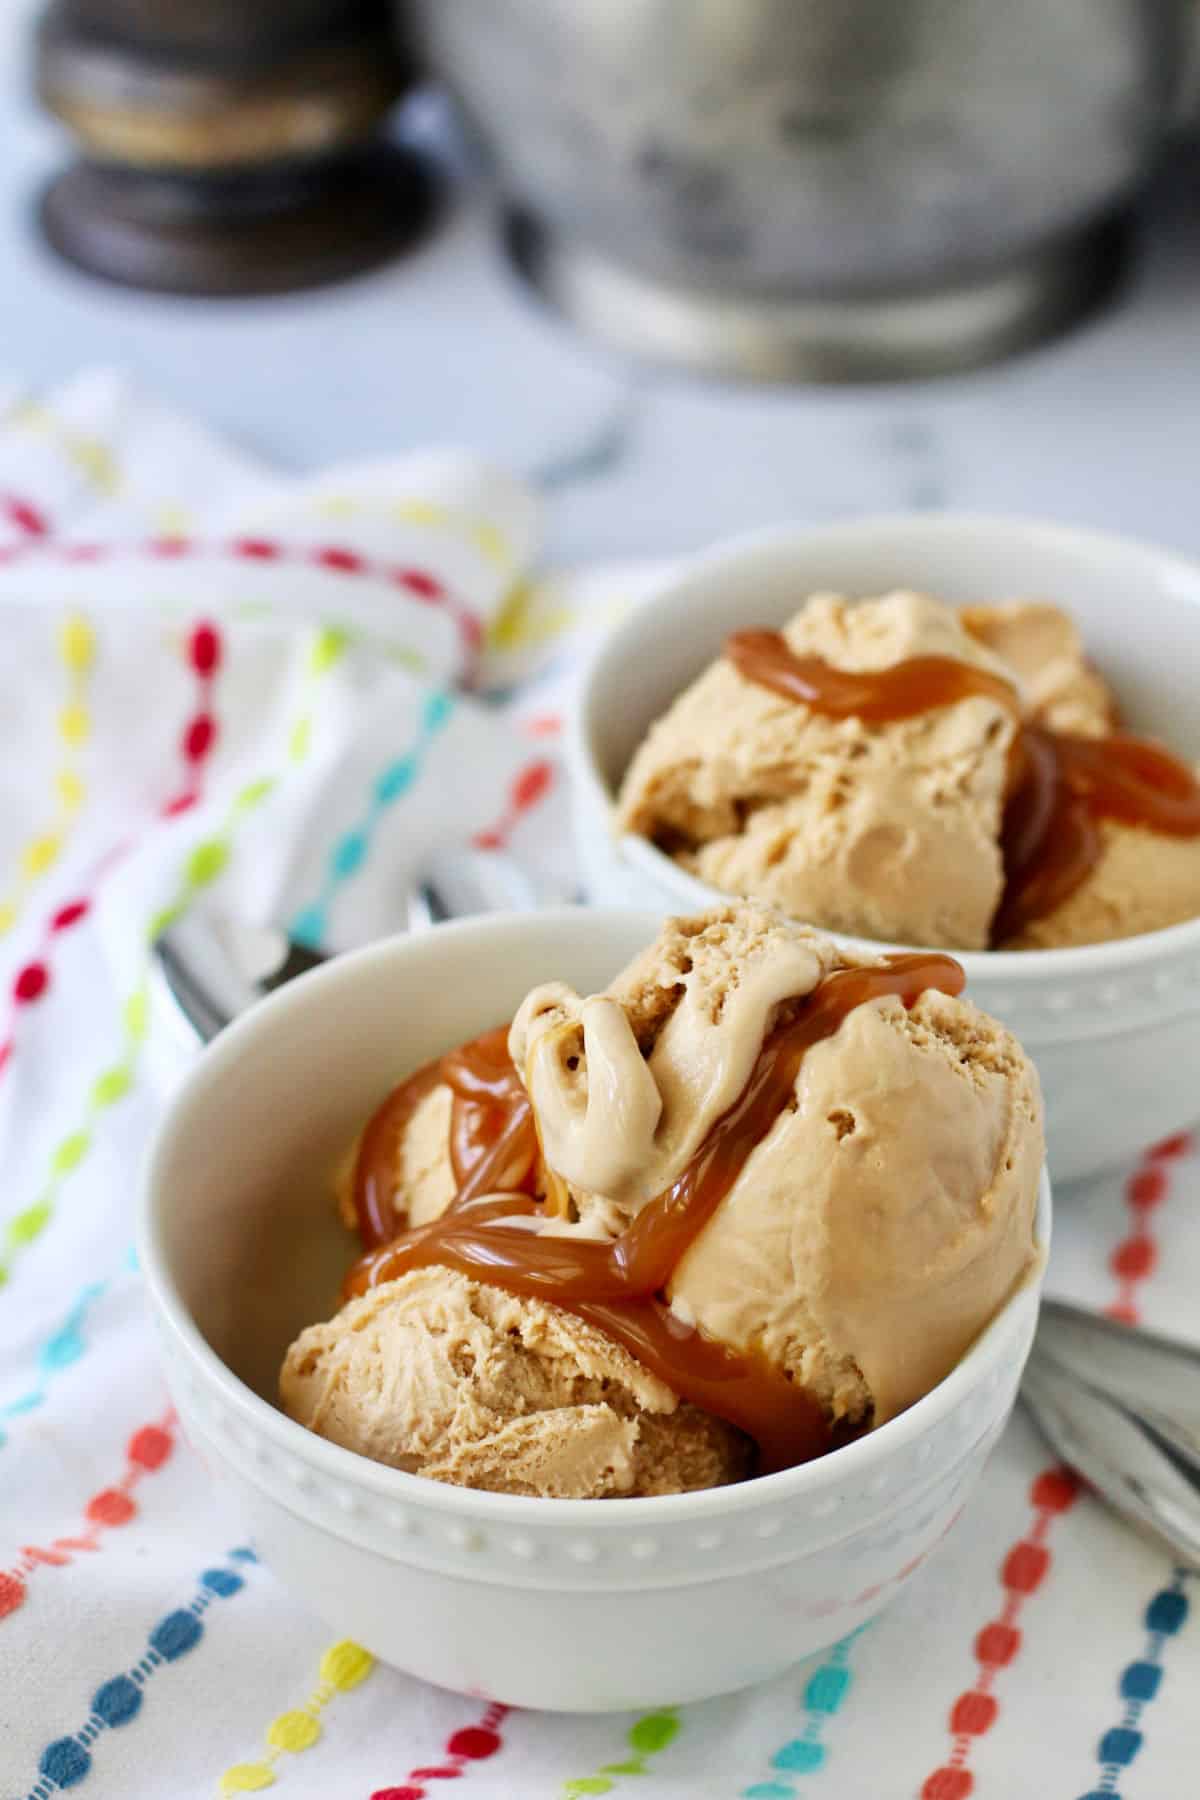 Coffee ice cream in two white bowls topped with caramel sauce.